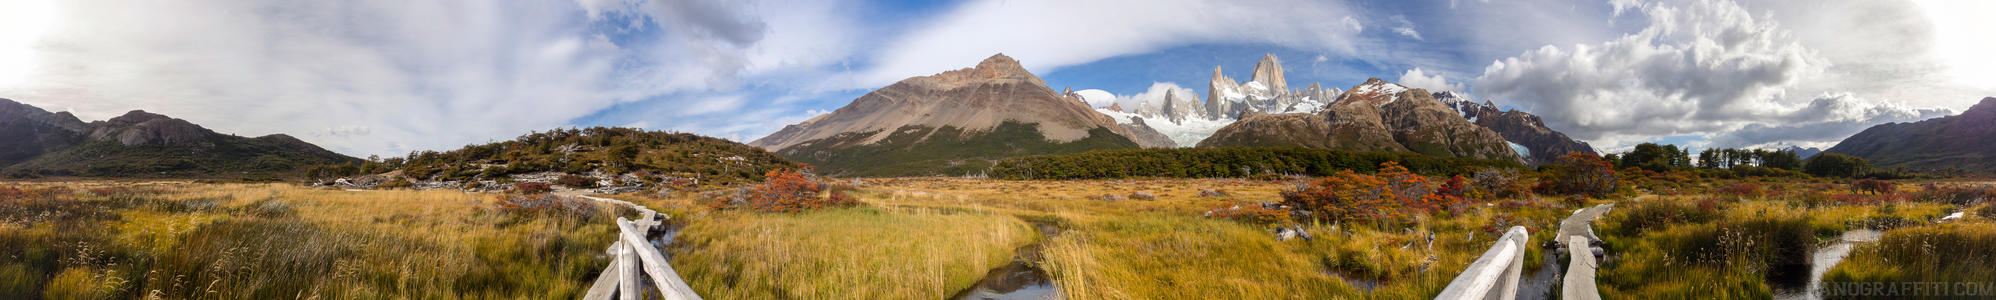 Crossing the Plains near Fitz Roy - From the center of a foot bridge, the watery plains can be seen surrounding you